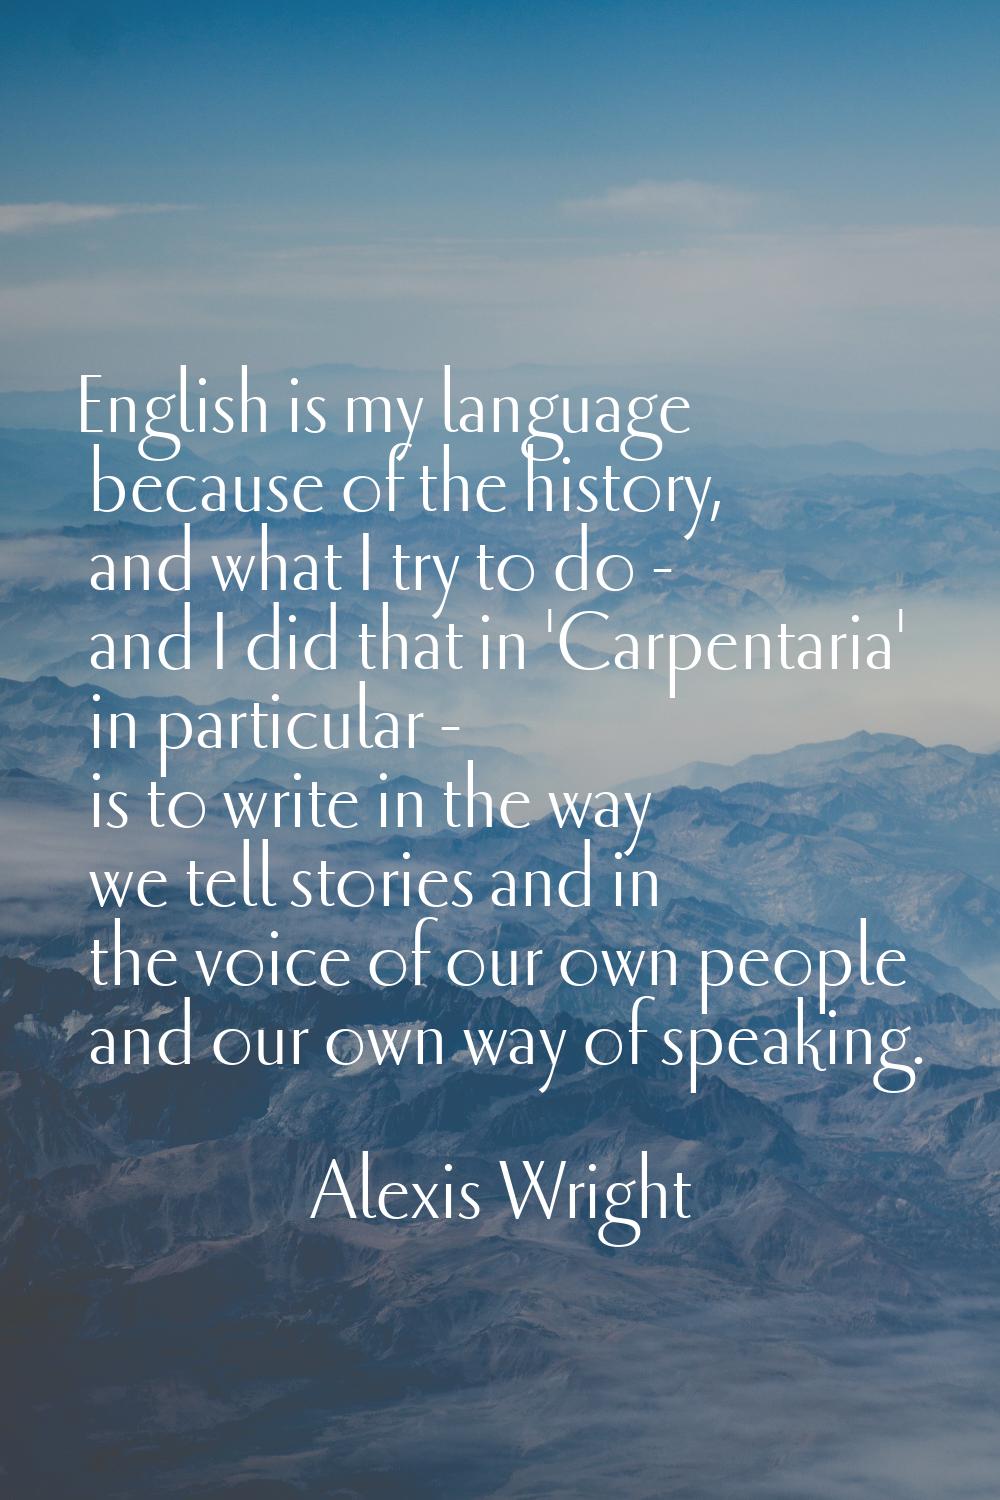 English is my language because of the history, and what I try to do - and I did that in 'Carpentari